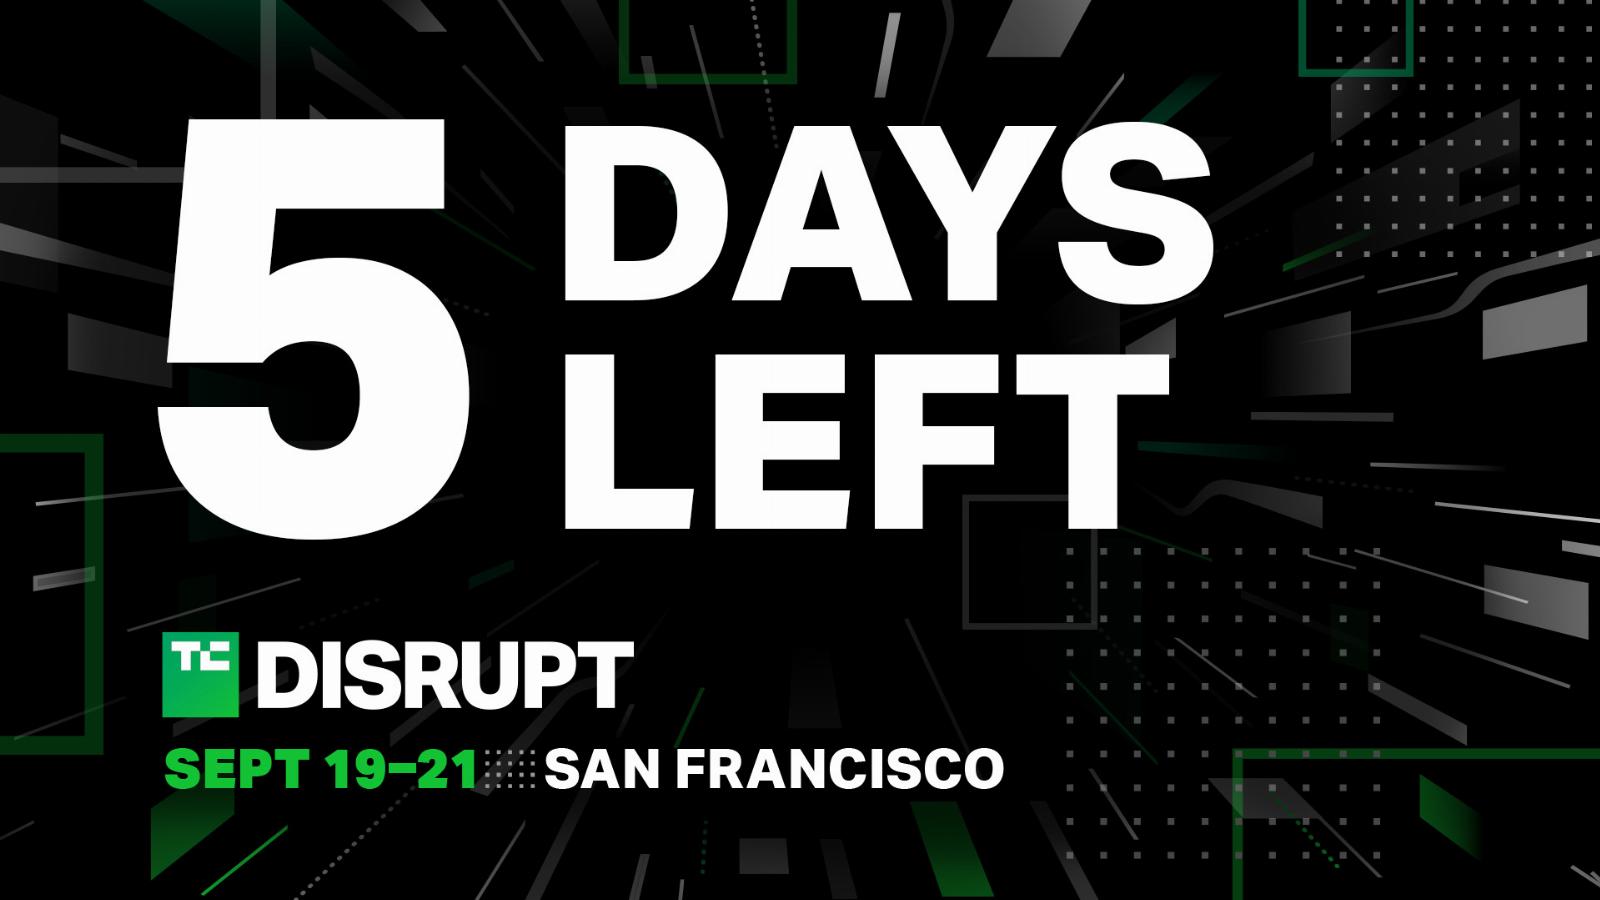 Only 5 days left to save $1,000 on Disrupt passes